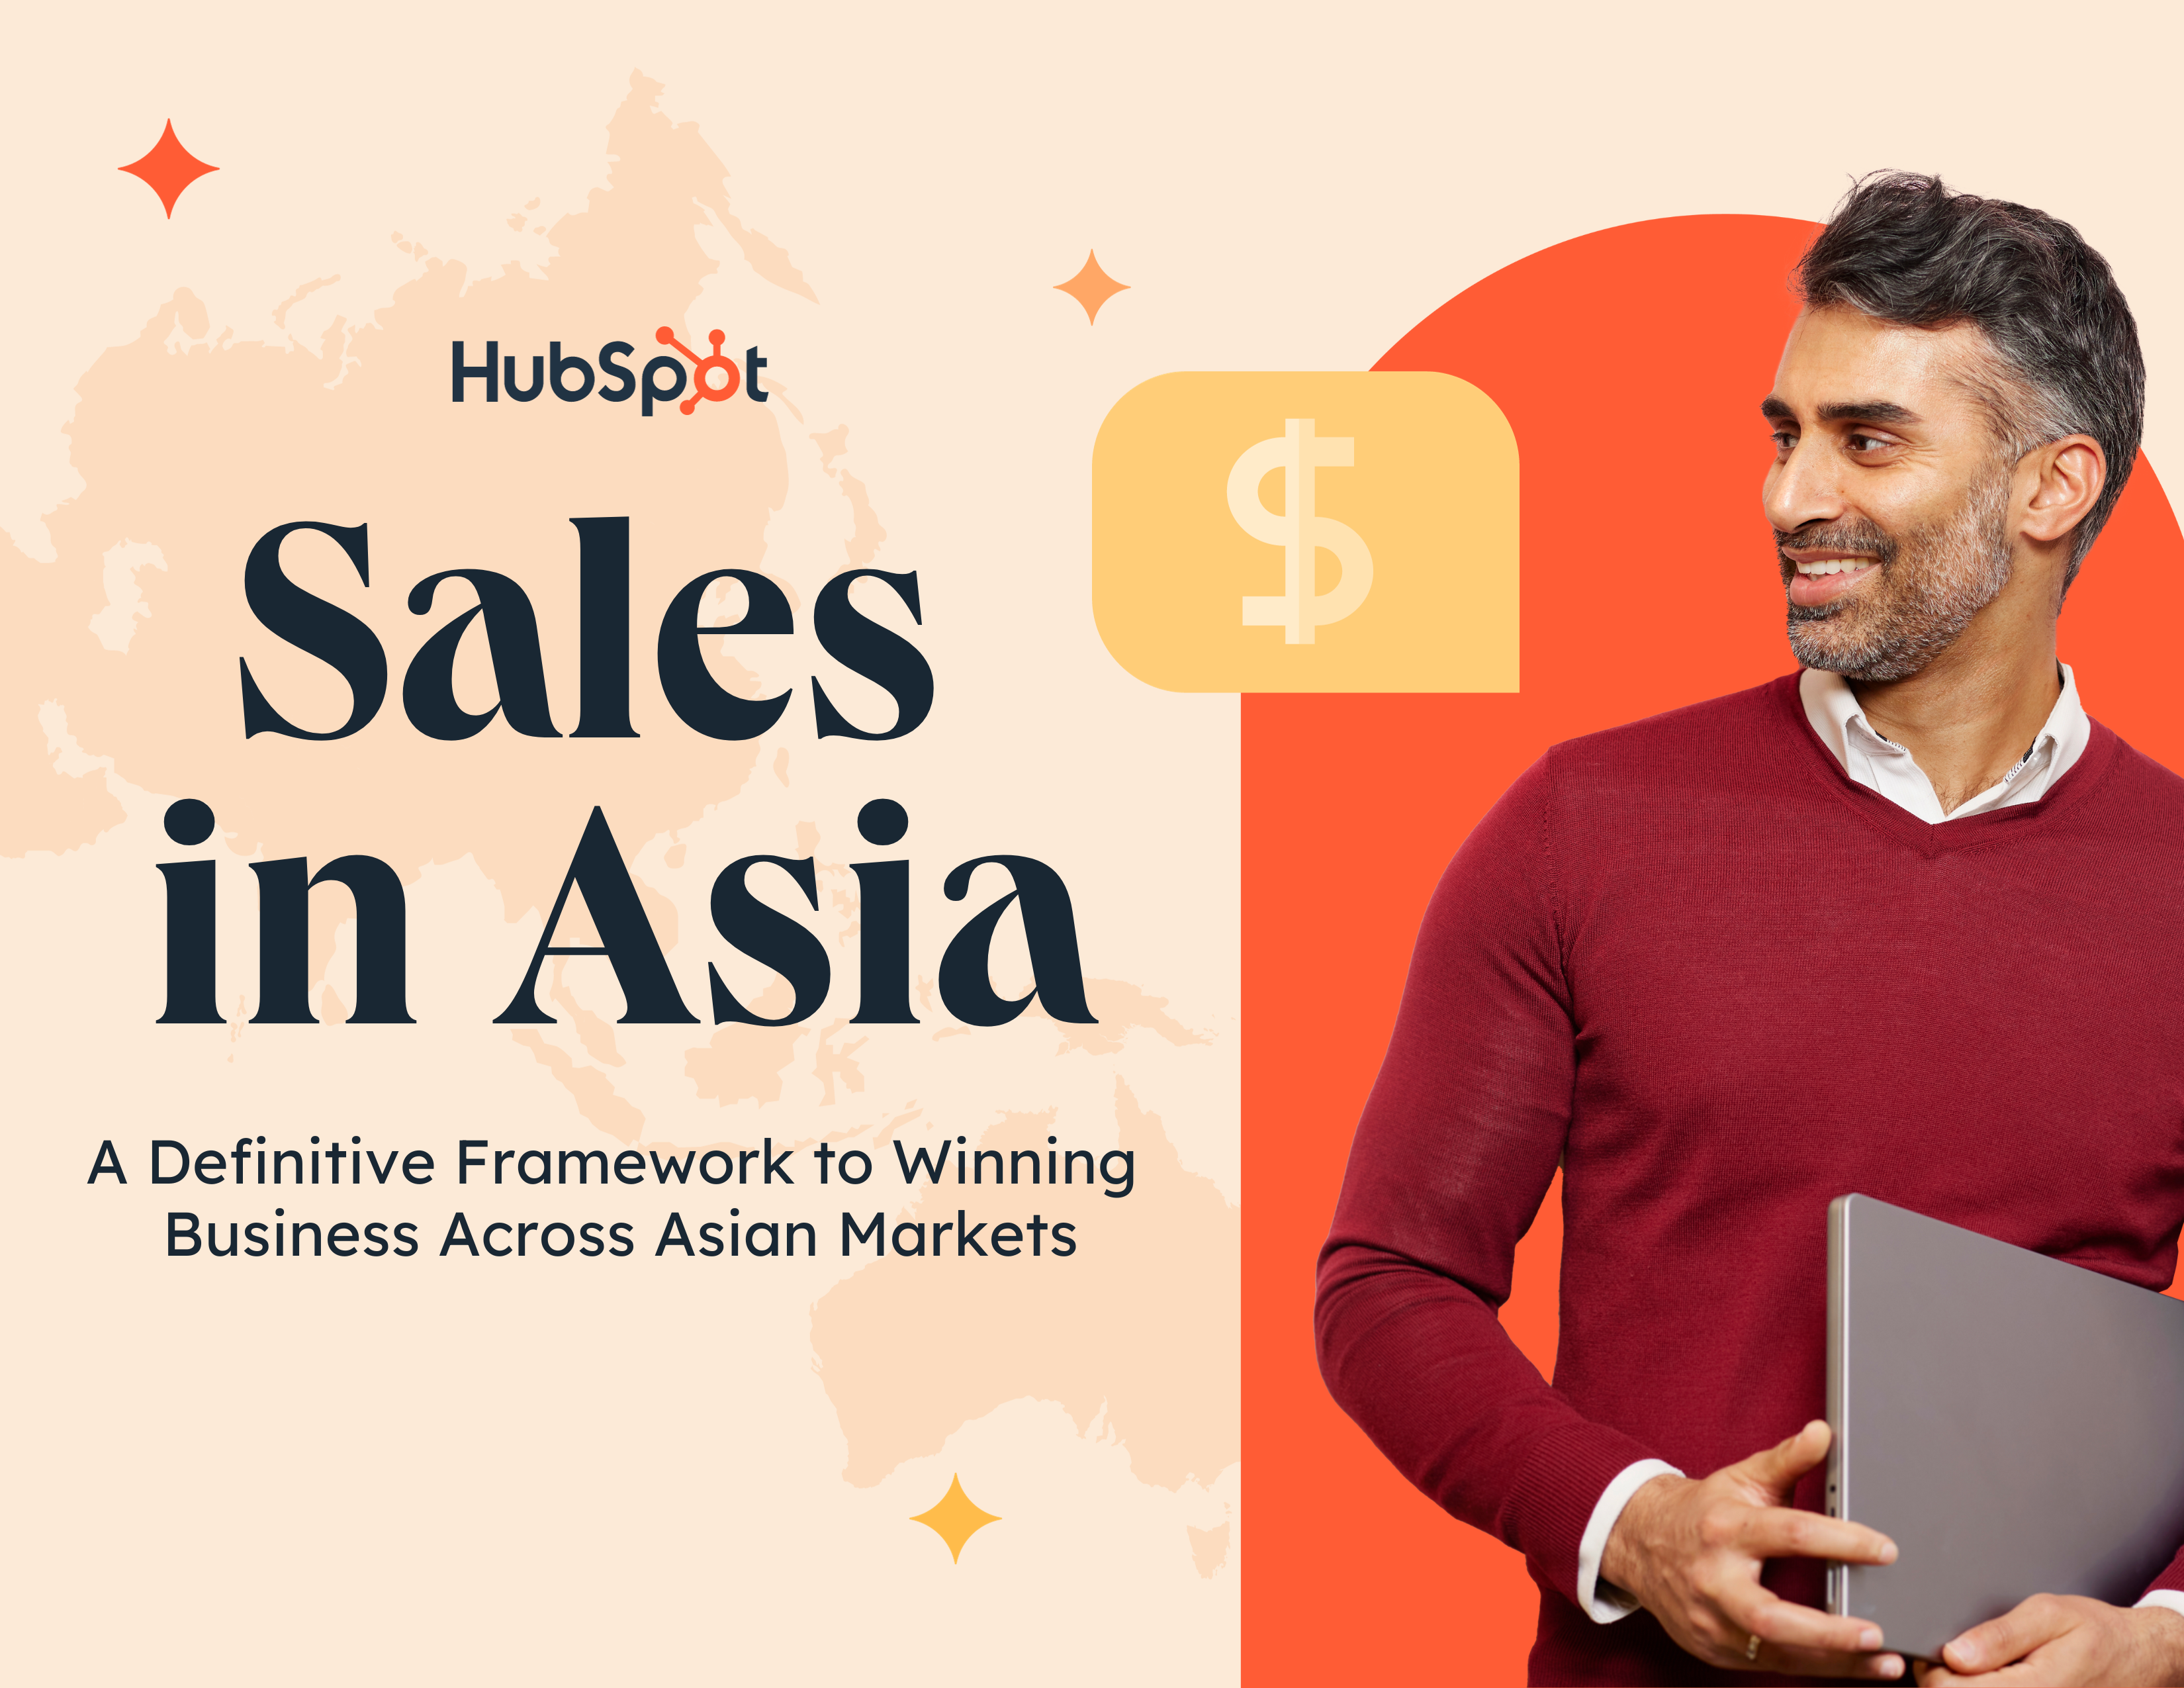 Sales in Asia: A Definitive Framework to Winning Business Across Asian Markets